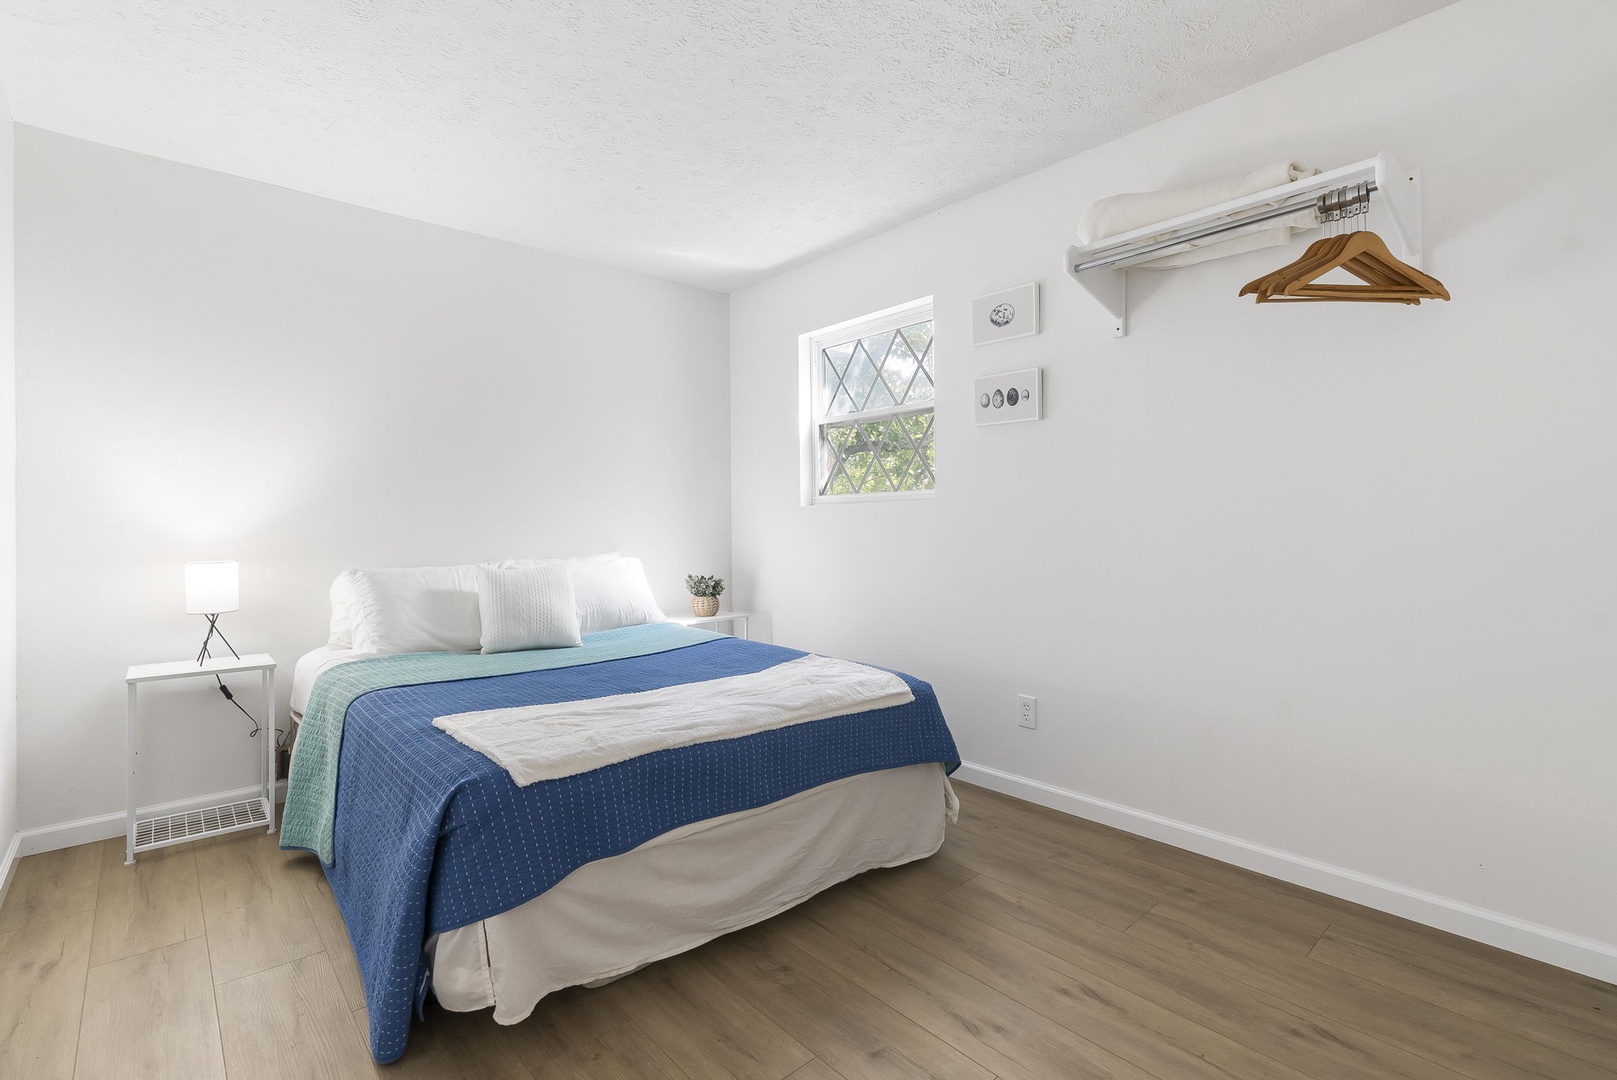 This tranquil 2nd floor bedroom offers a queen-sized bed